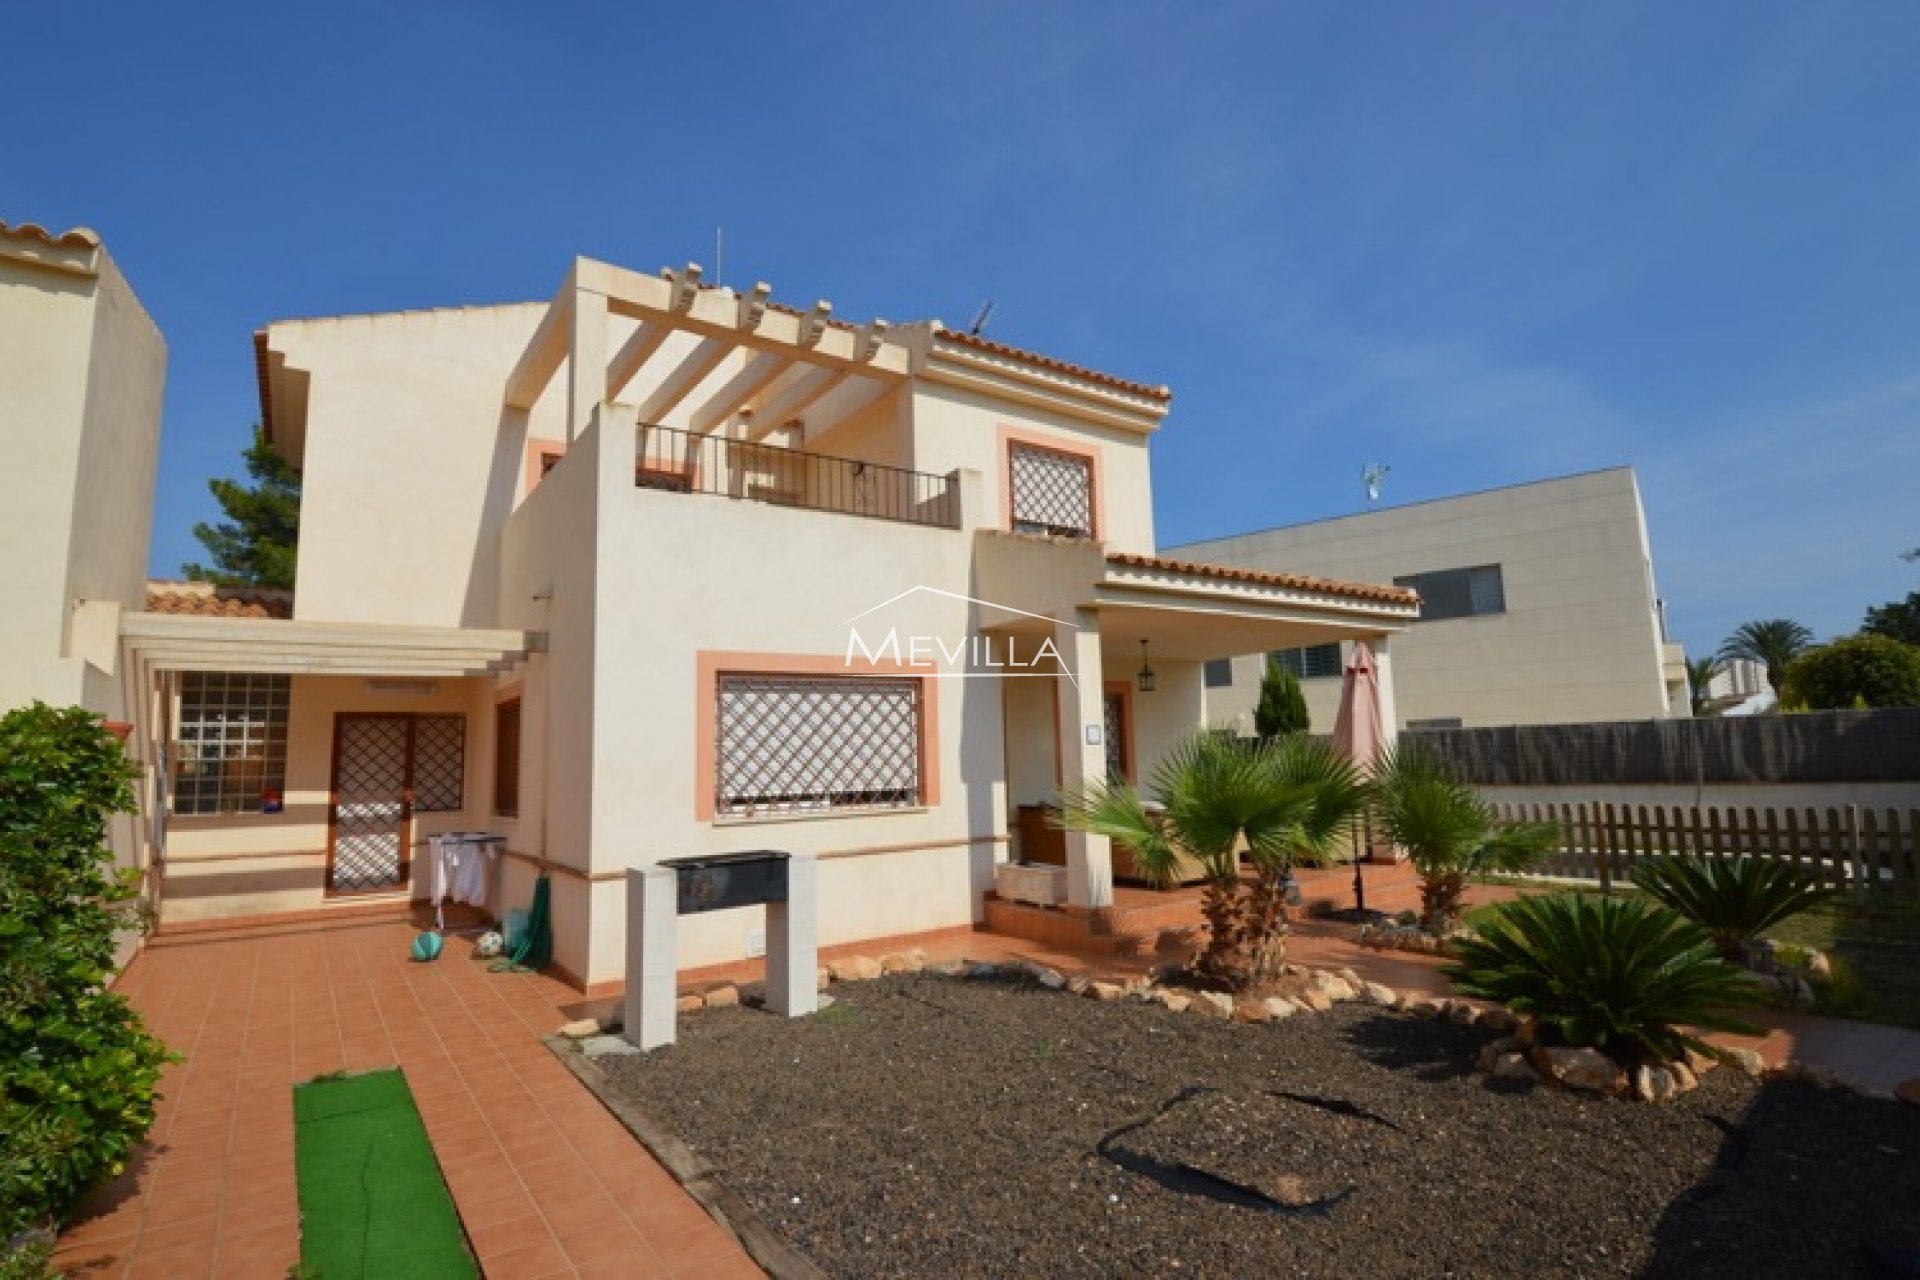 This beautiful villa in Campoamor, one of the best areas of the Costa Blanca for sale.